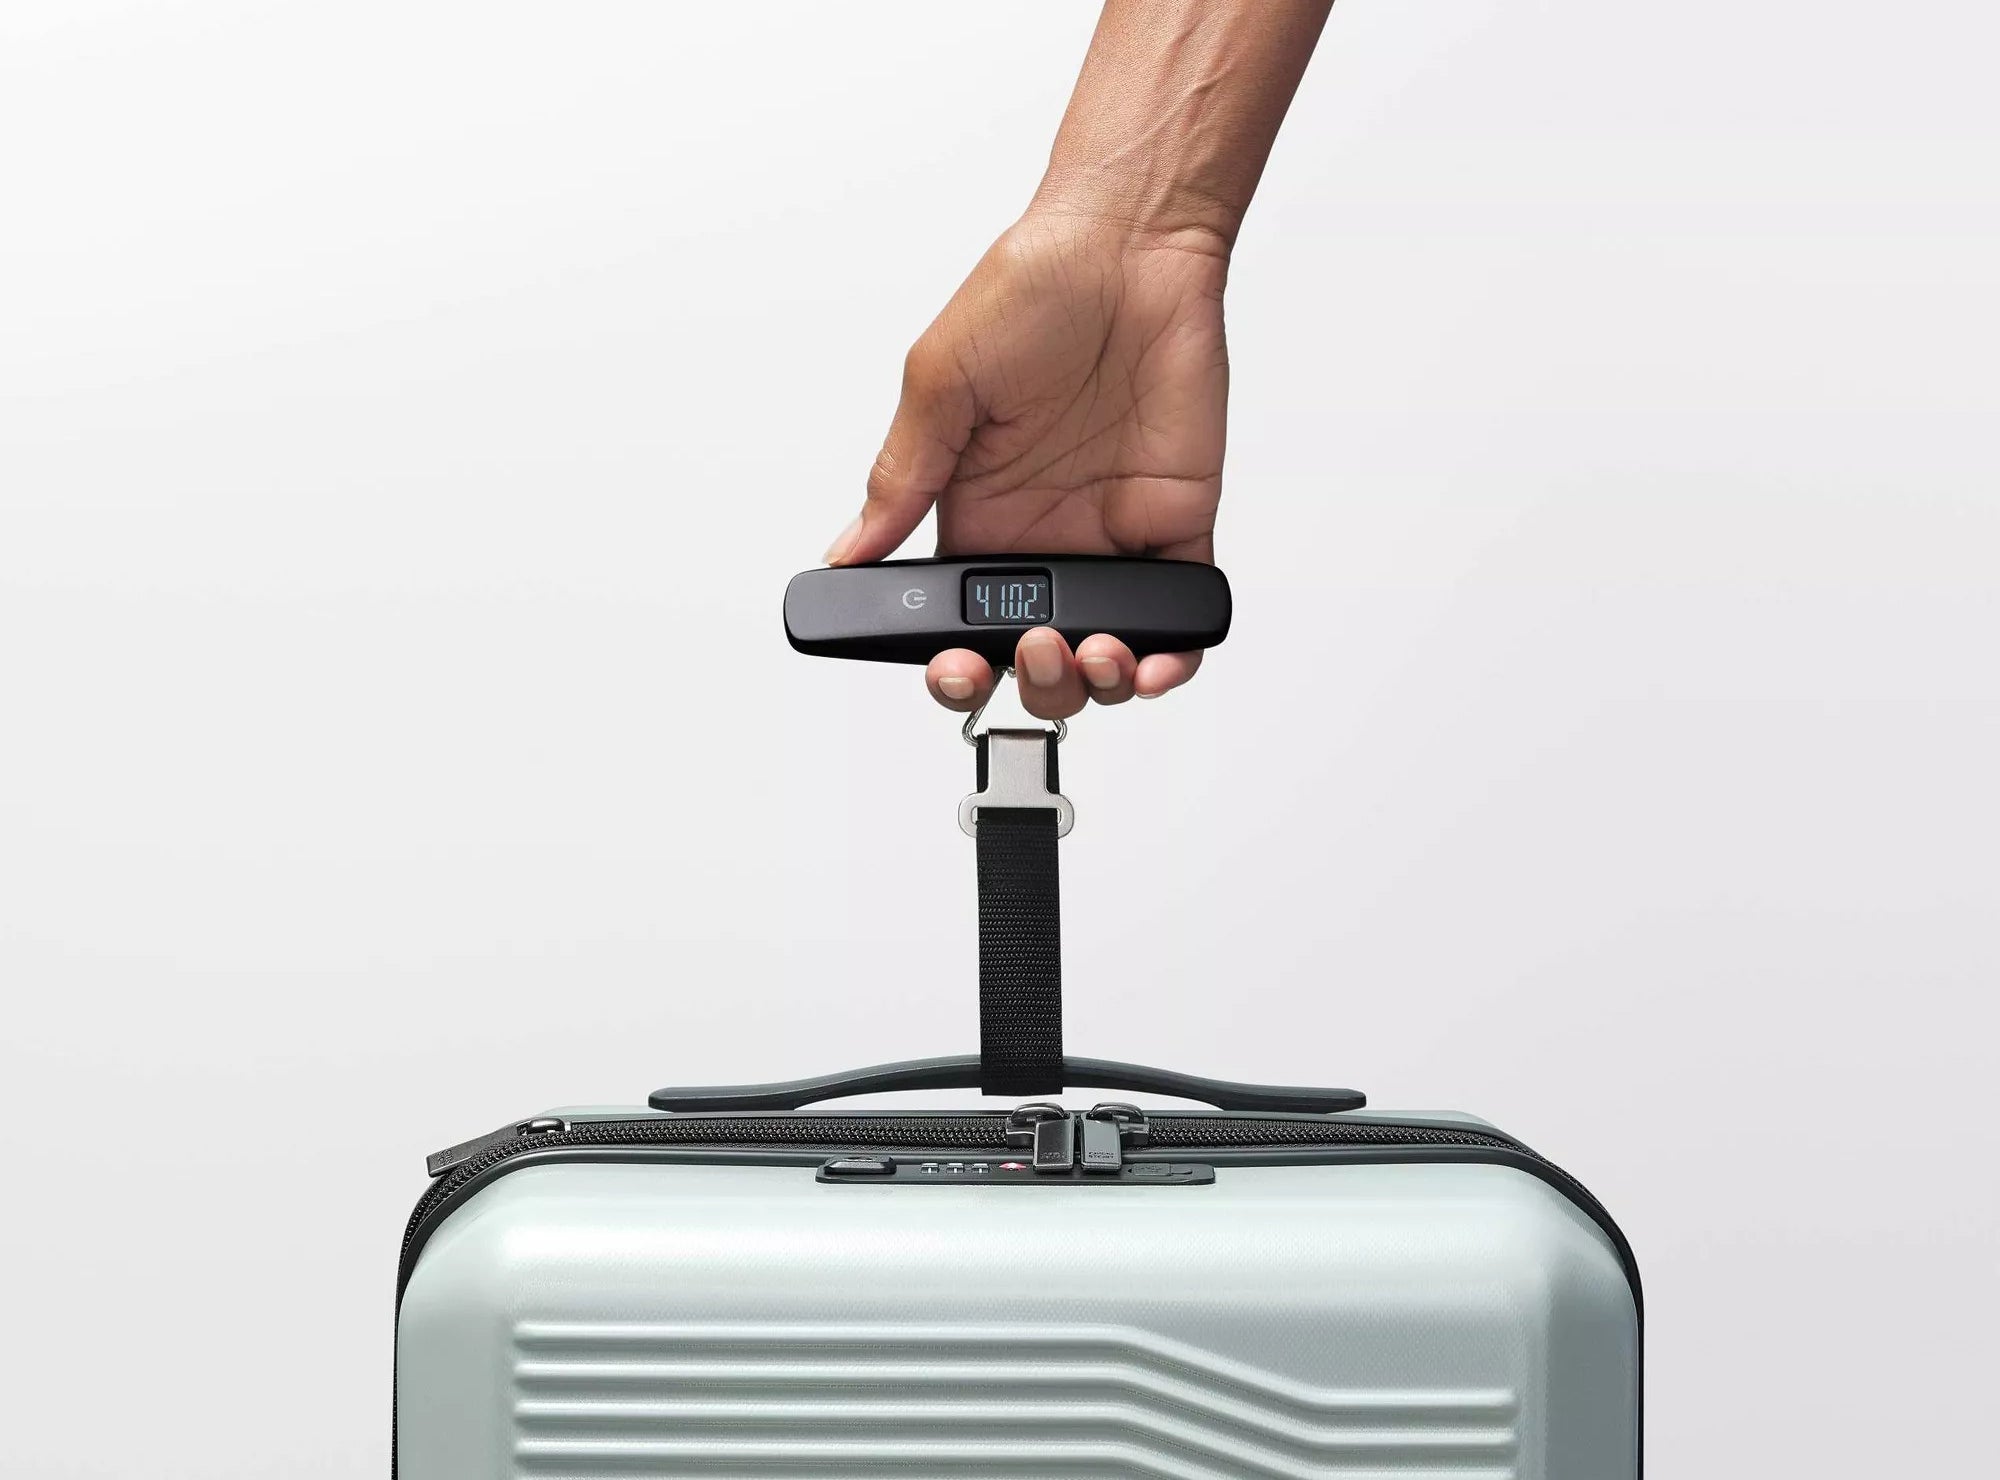 A hand holding the scale, which is attached to a piece of luggage